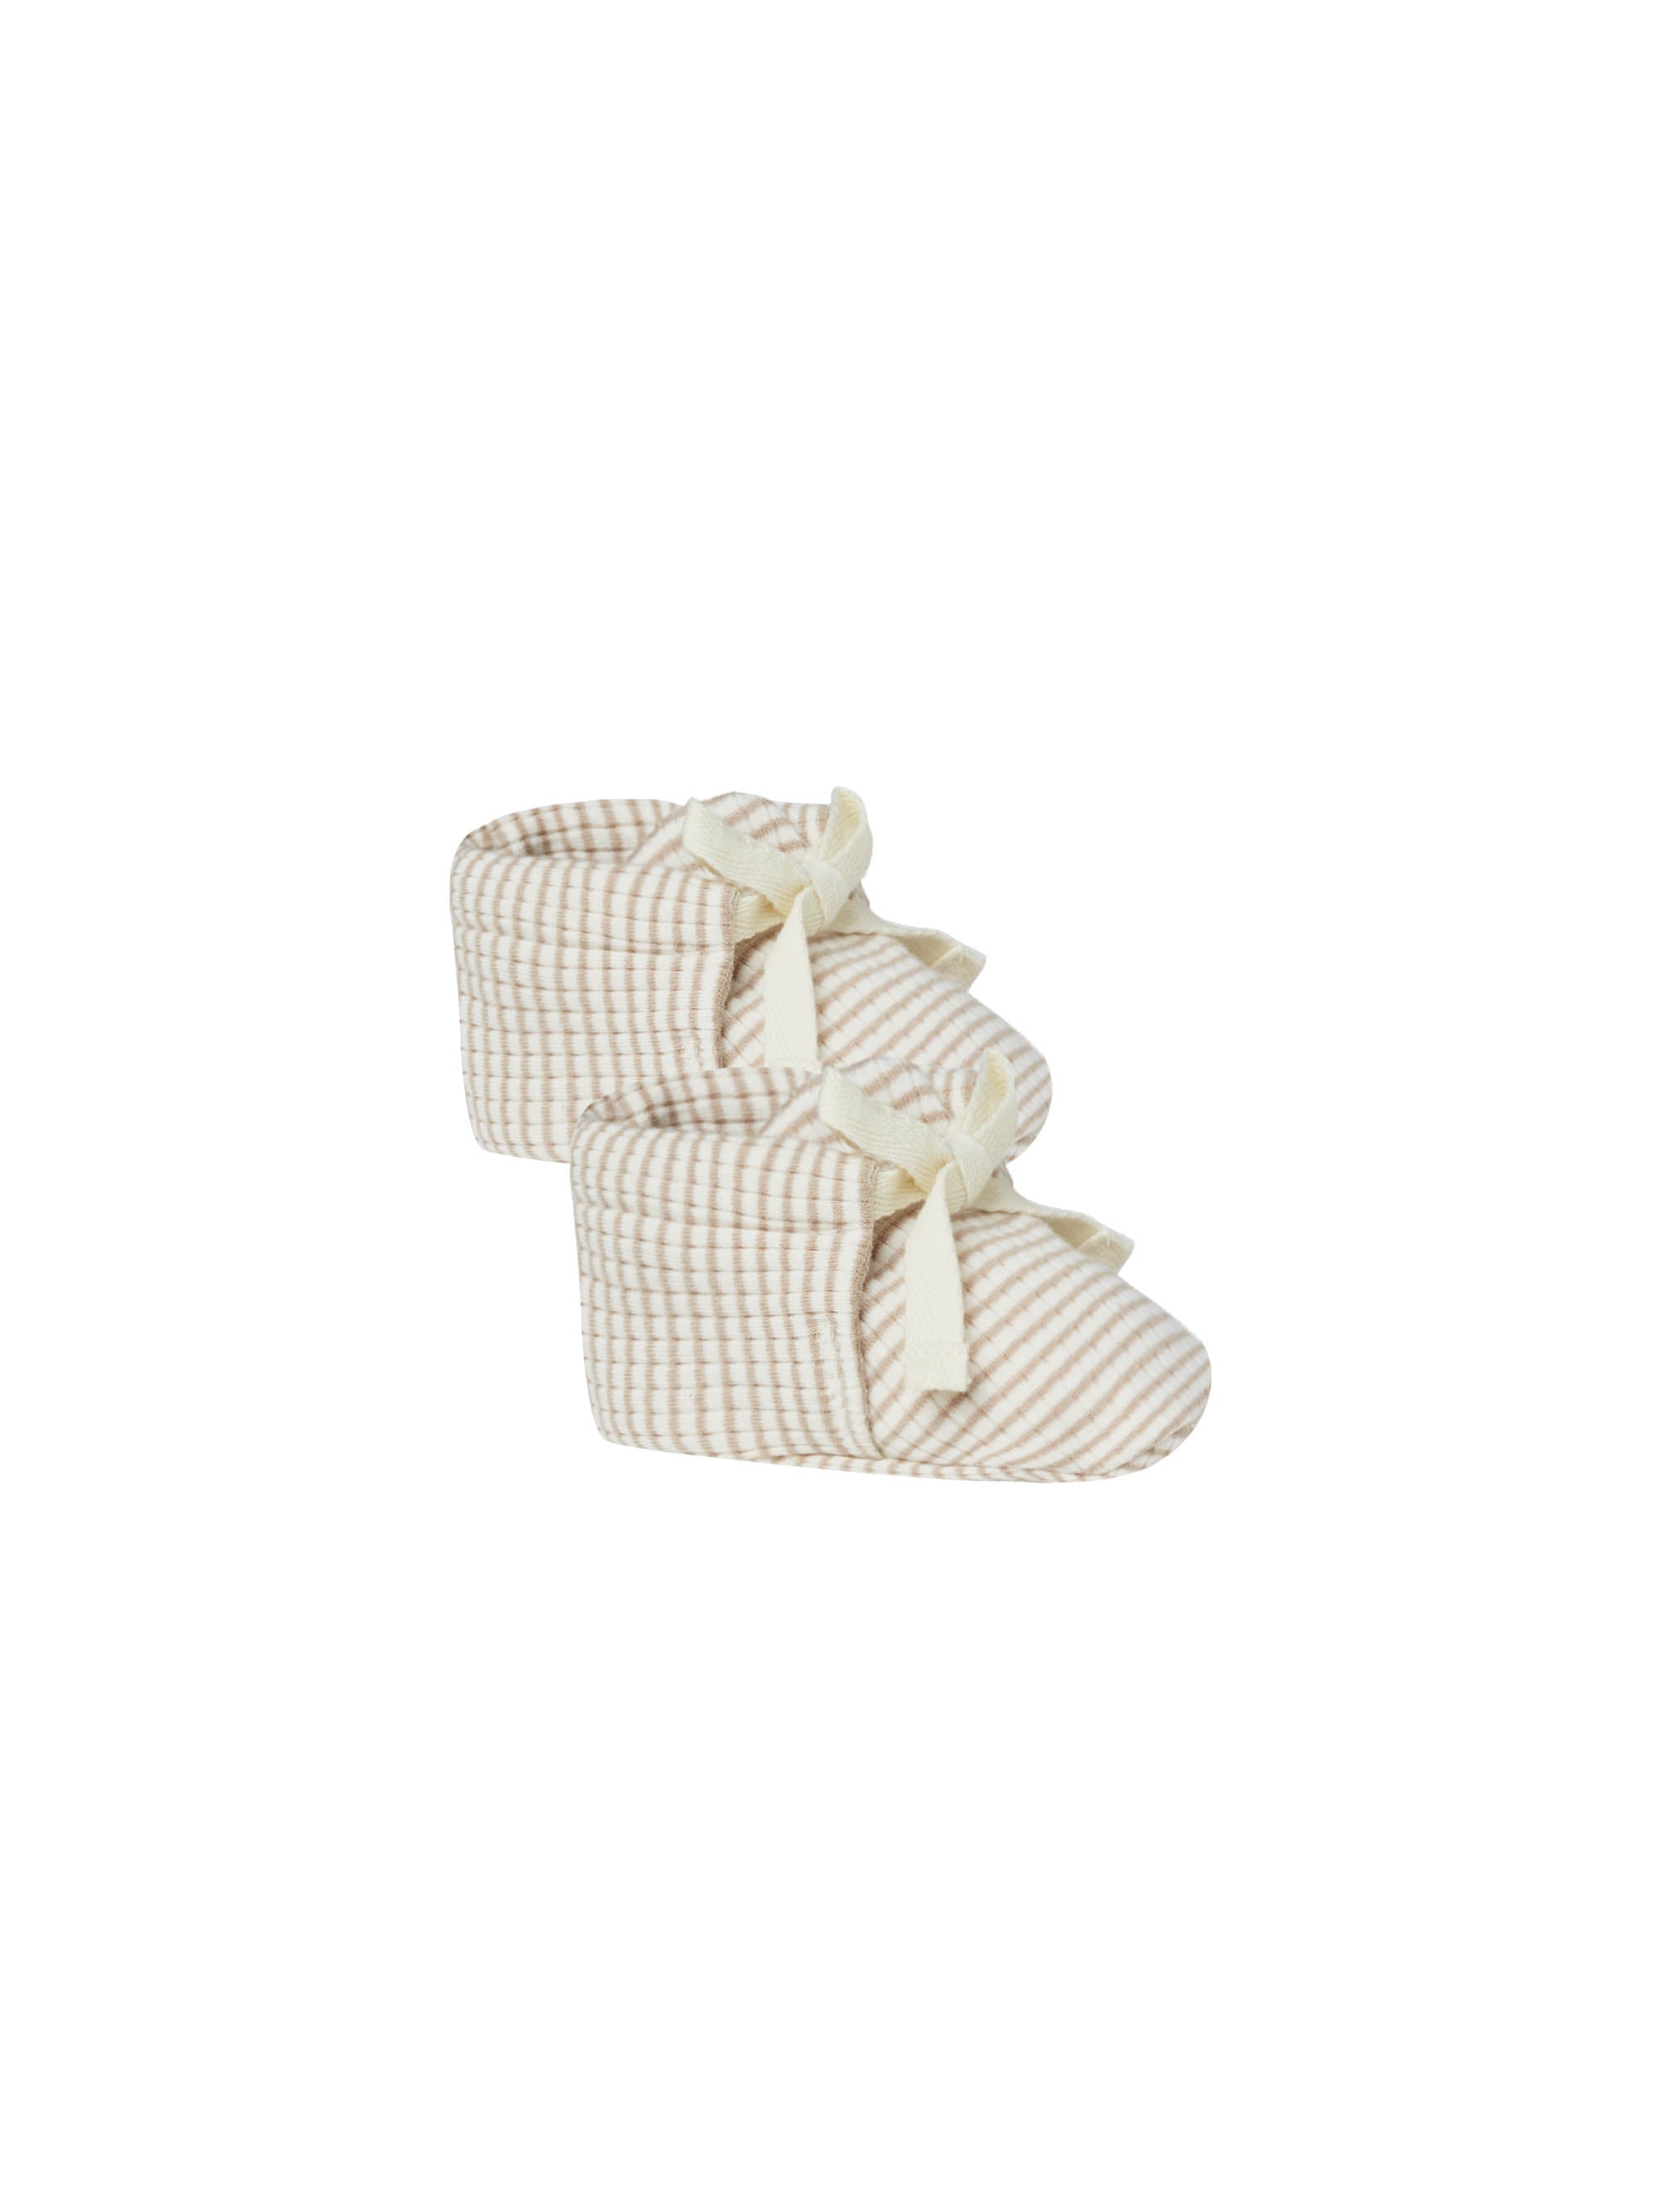 QUINCY MAE RIBBED BABY BOOTIES / ASH STRIPE